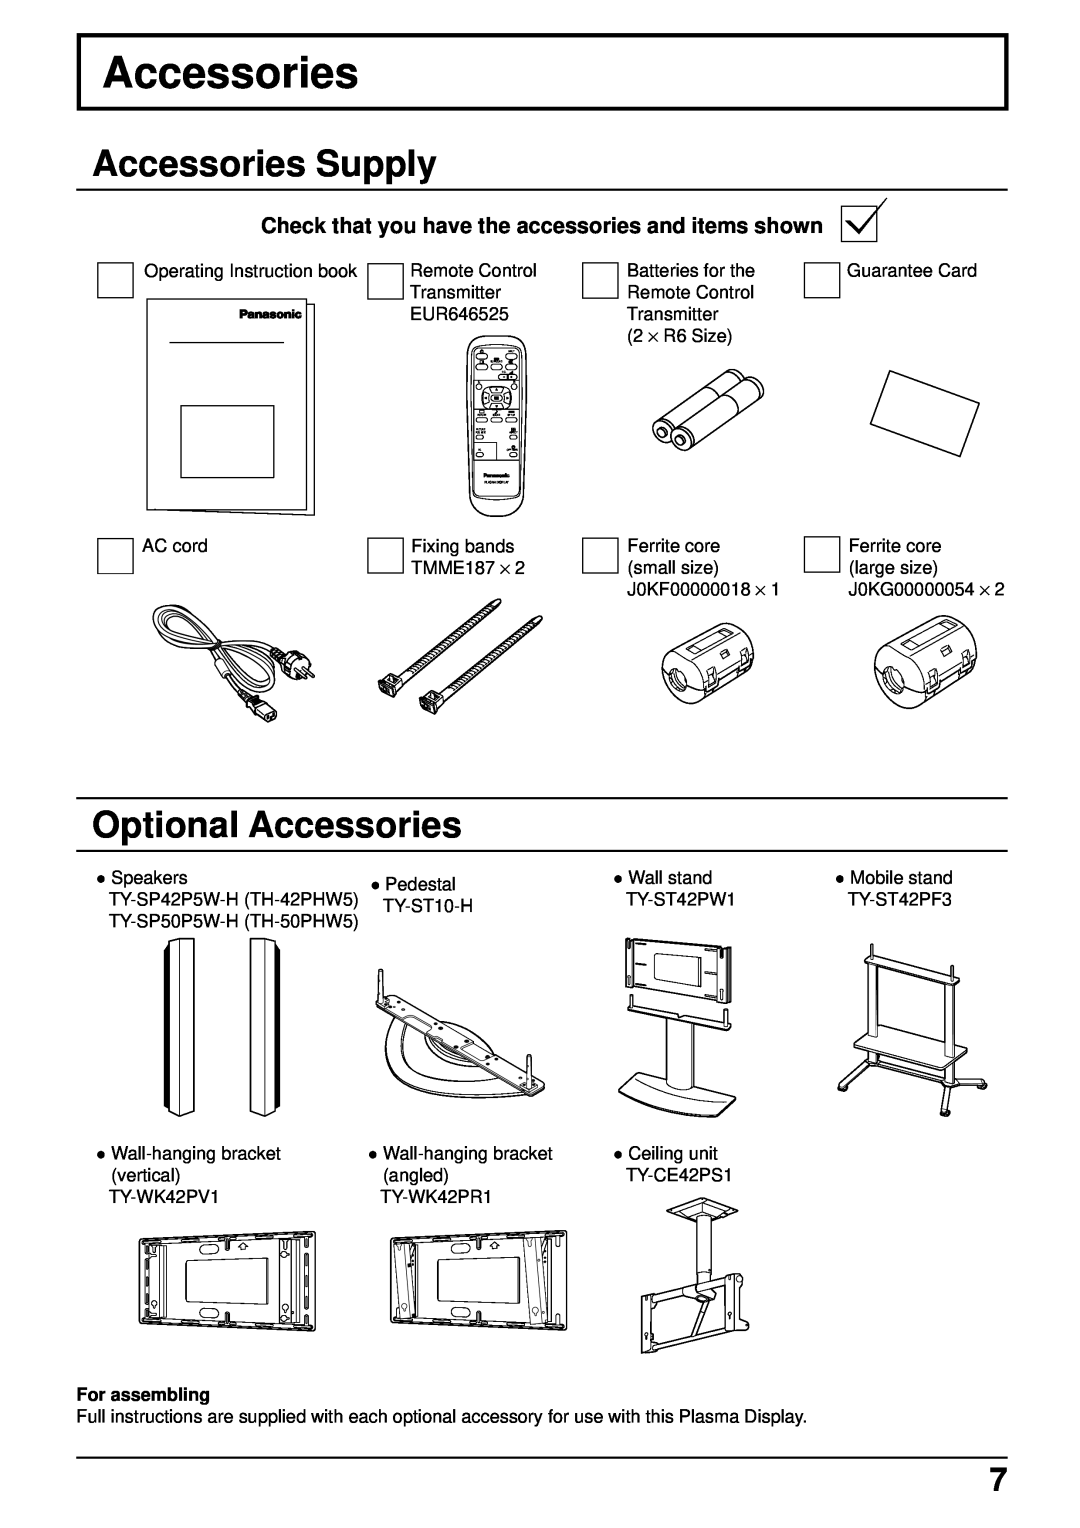 Panasonic TH-42PHW5 Accessories Supply, Optional Accessories, Check that you have the accessories and items shown 